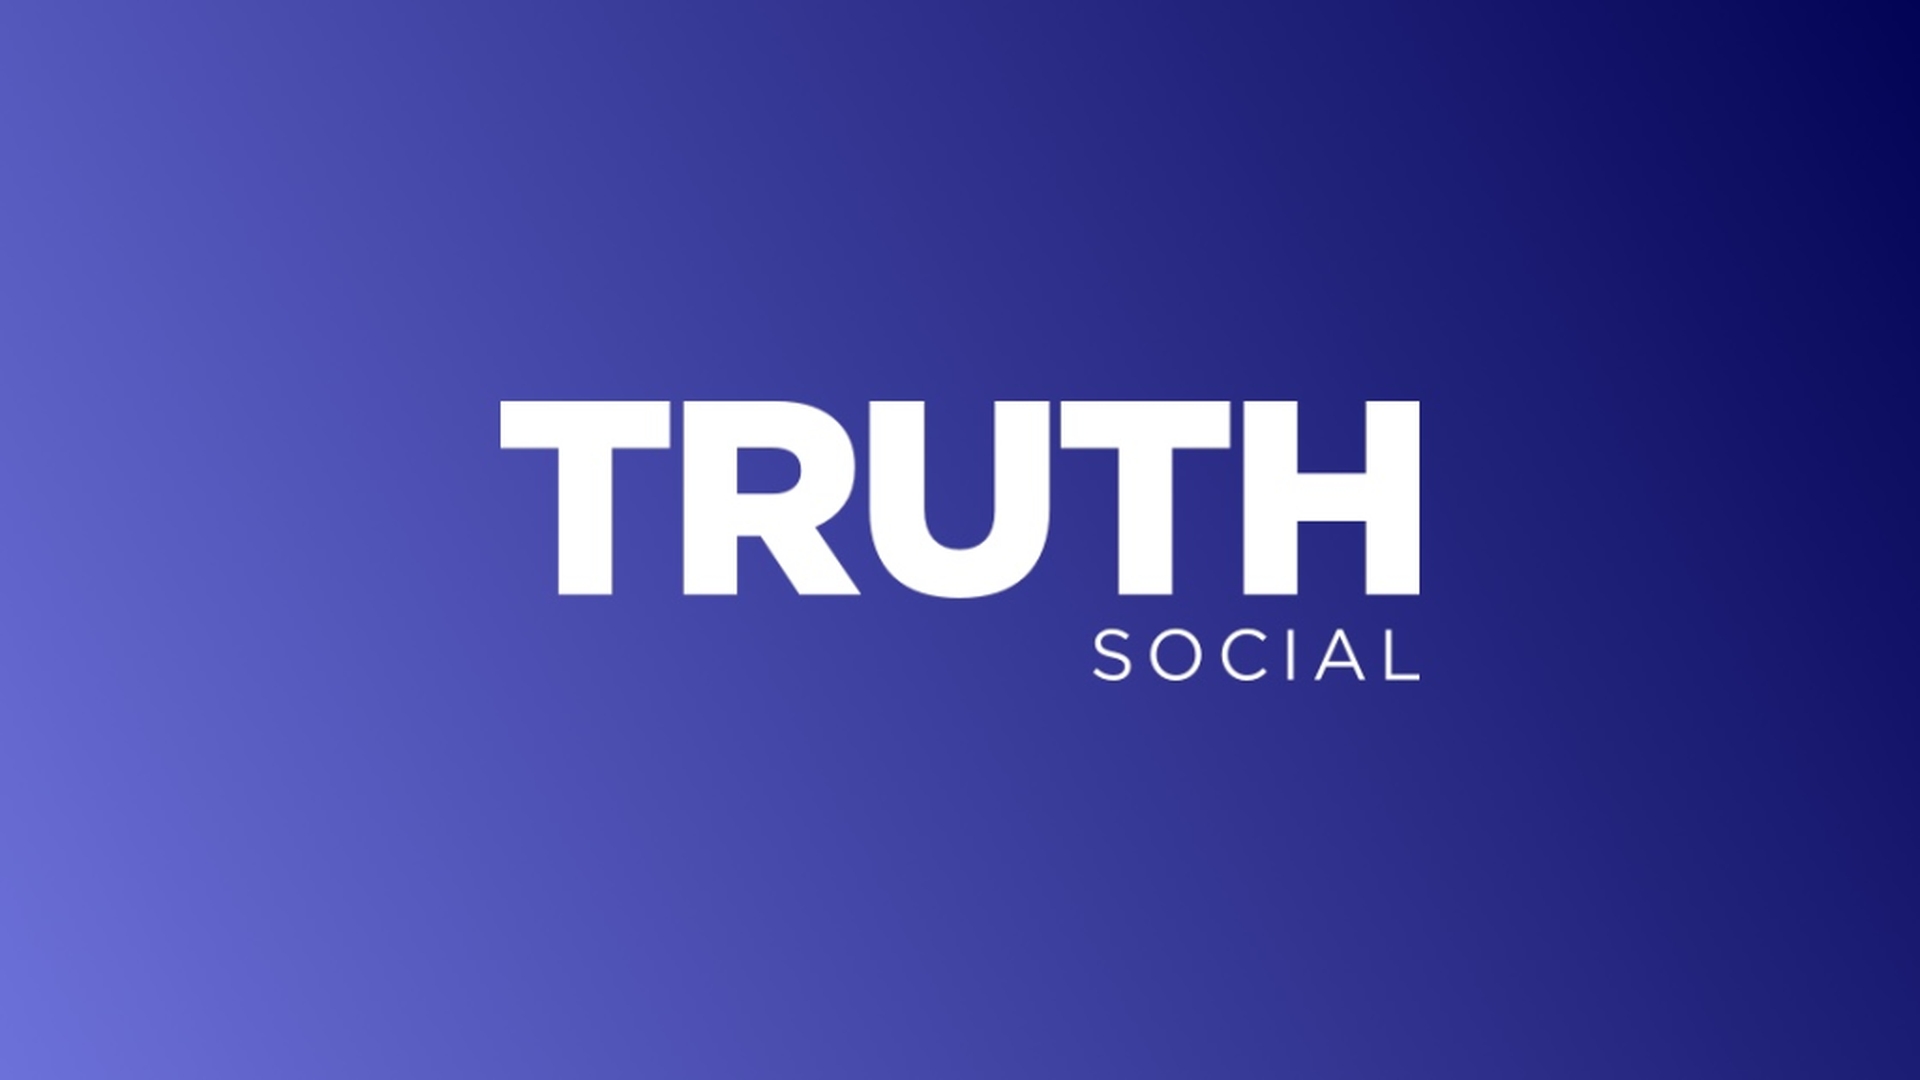 After its release on the Apple App Store, Trump's Truth Social app is now approved for Google Play Store and will be available to Android users very soon.